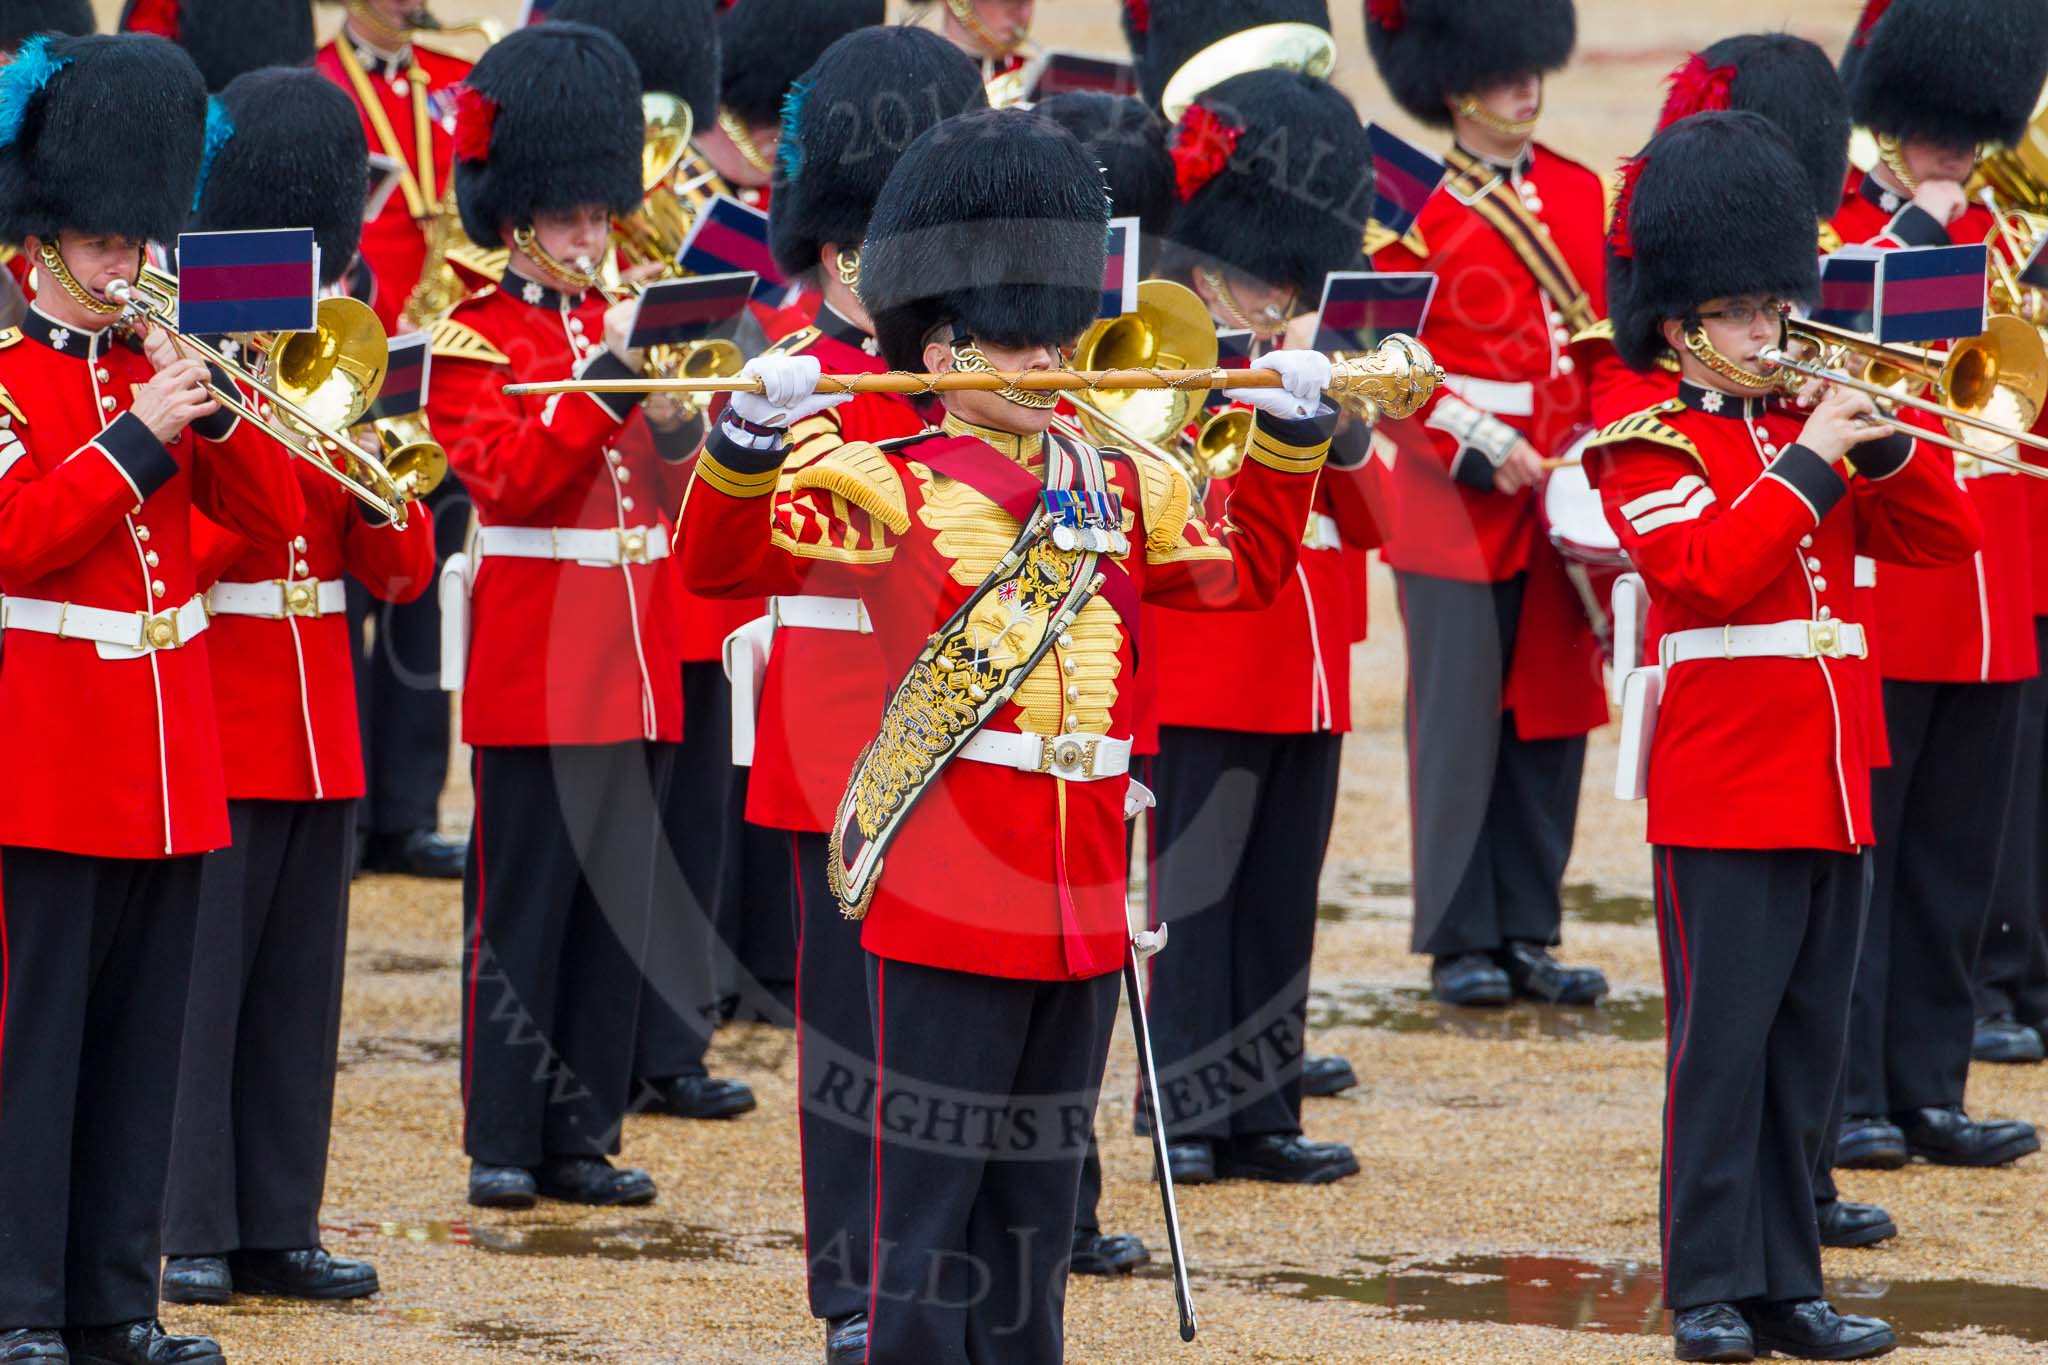 The Colonel's Review 2014.
Horse Guards Parade, Westminster,
London,

United Kingdom,
on 07 June 2014 at 11:49, image #573